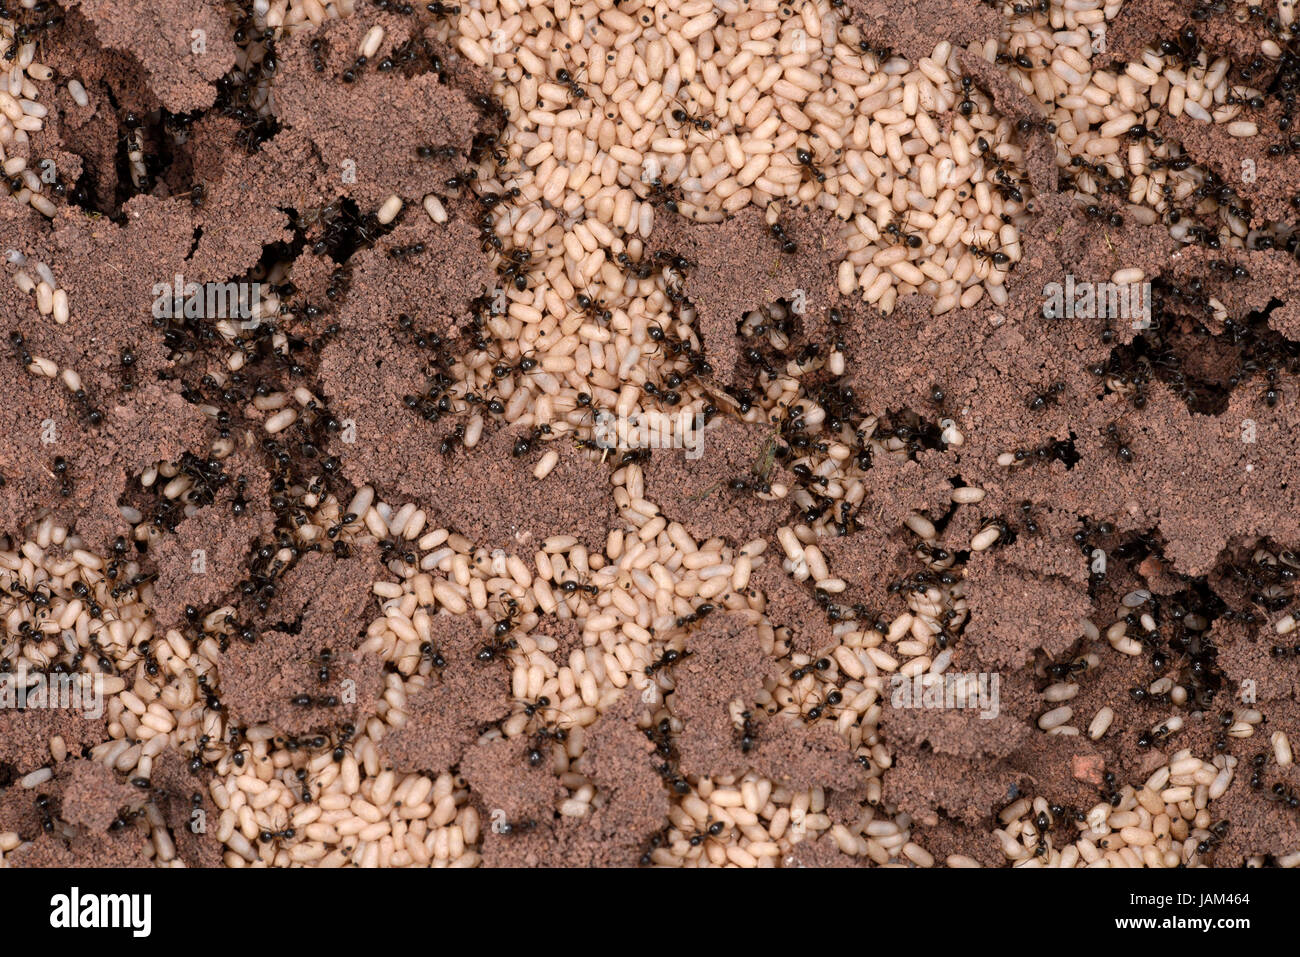 Black Garden Ant (Lasius niger) exposed nest showing workers and cocoons, Monmouth, Wales, September Stock Photo